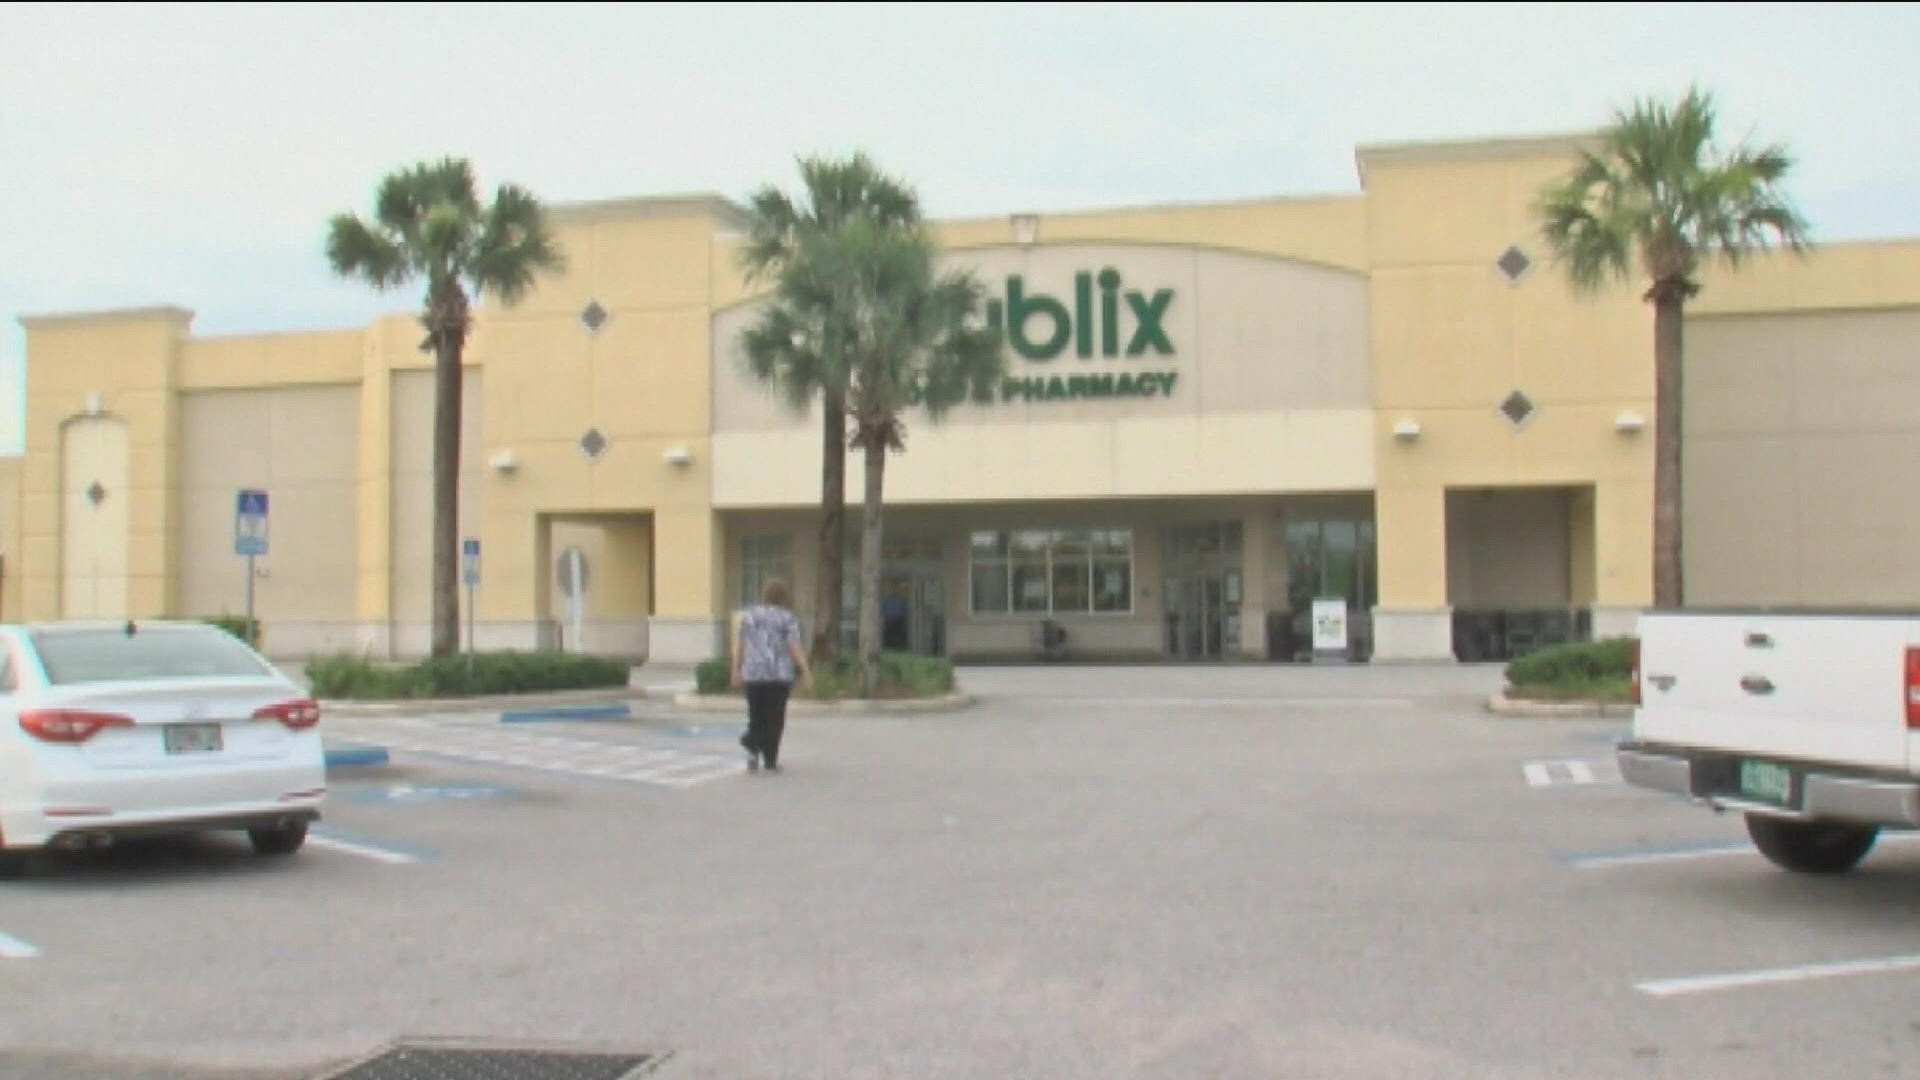 Publix is giving some of its employees something to look forward to in the new year.